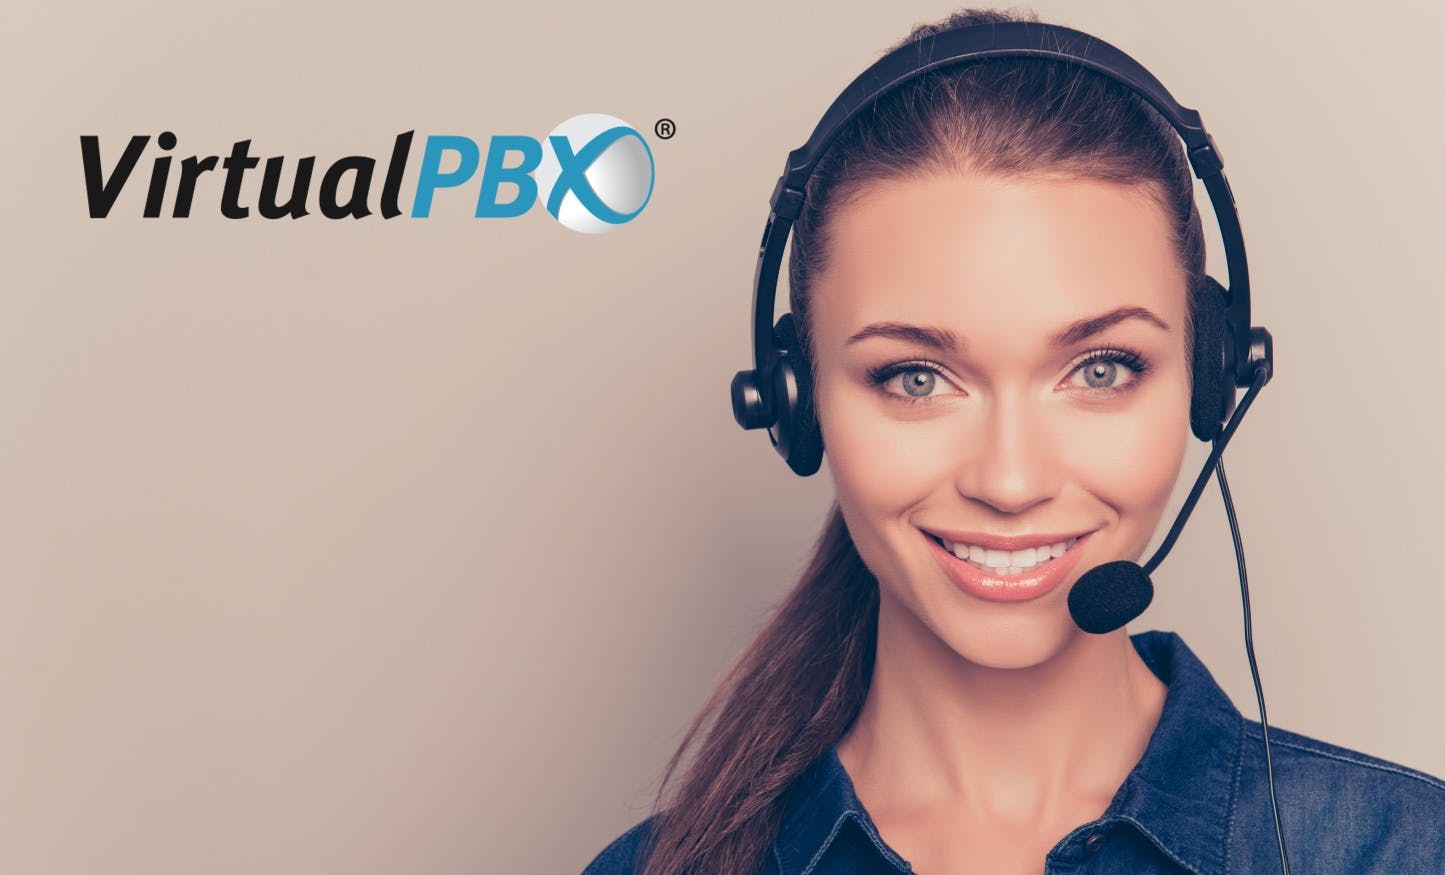 VirtualPBX VoIP Review: Supports All Business Sizes